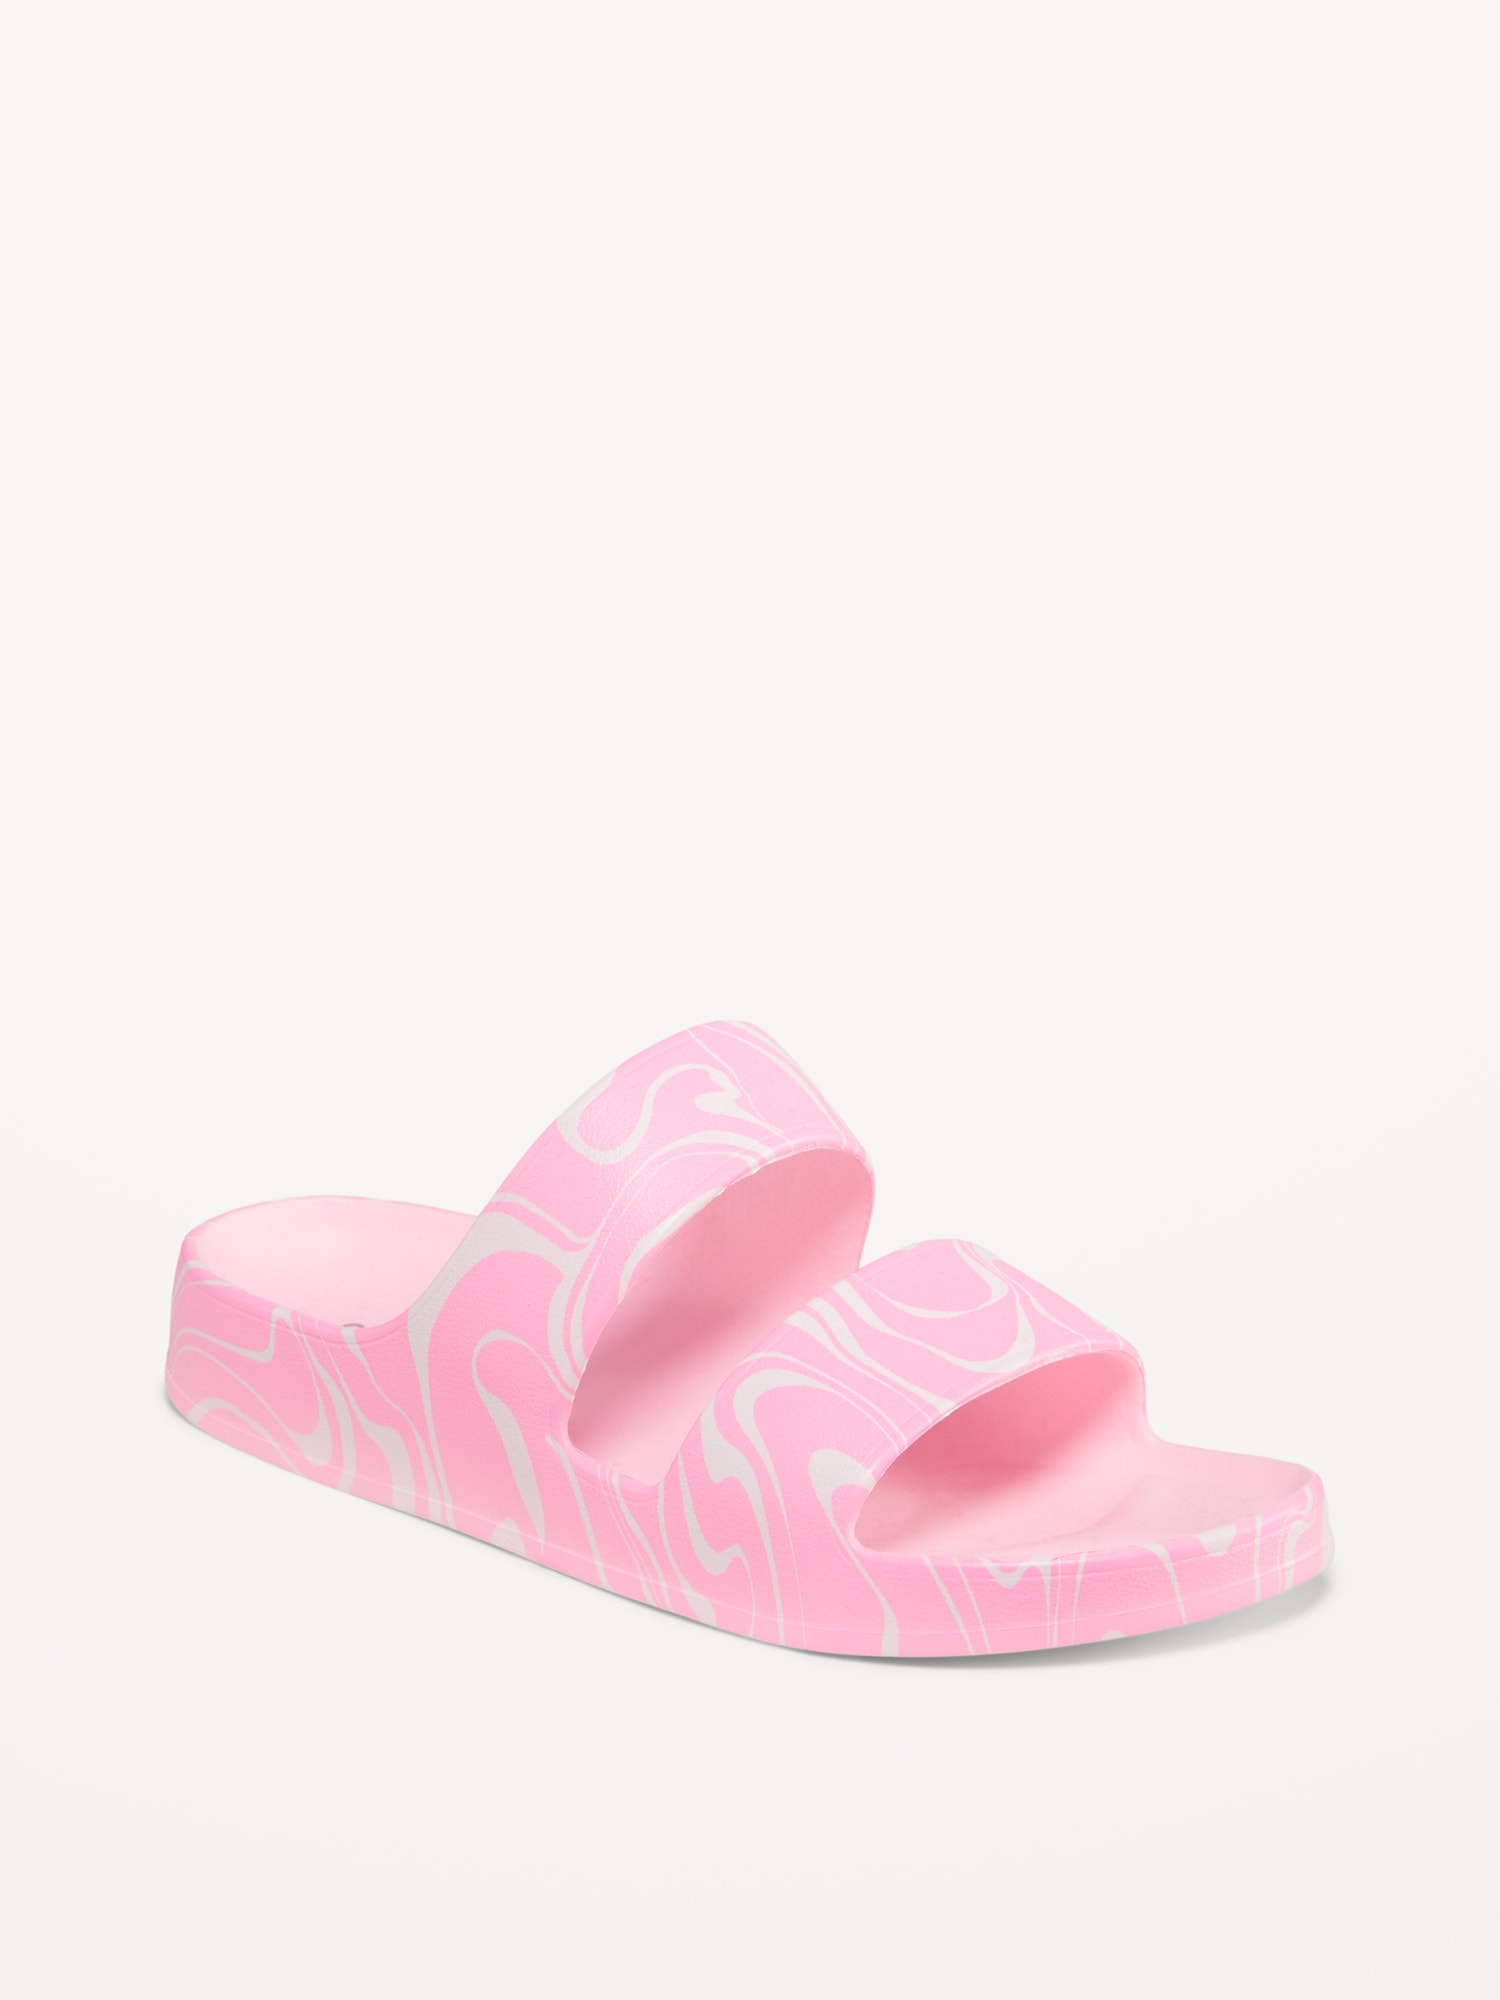 Old Navy Slide Sandals (Partially Plant-Based